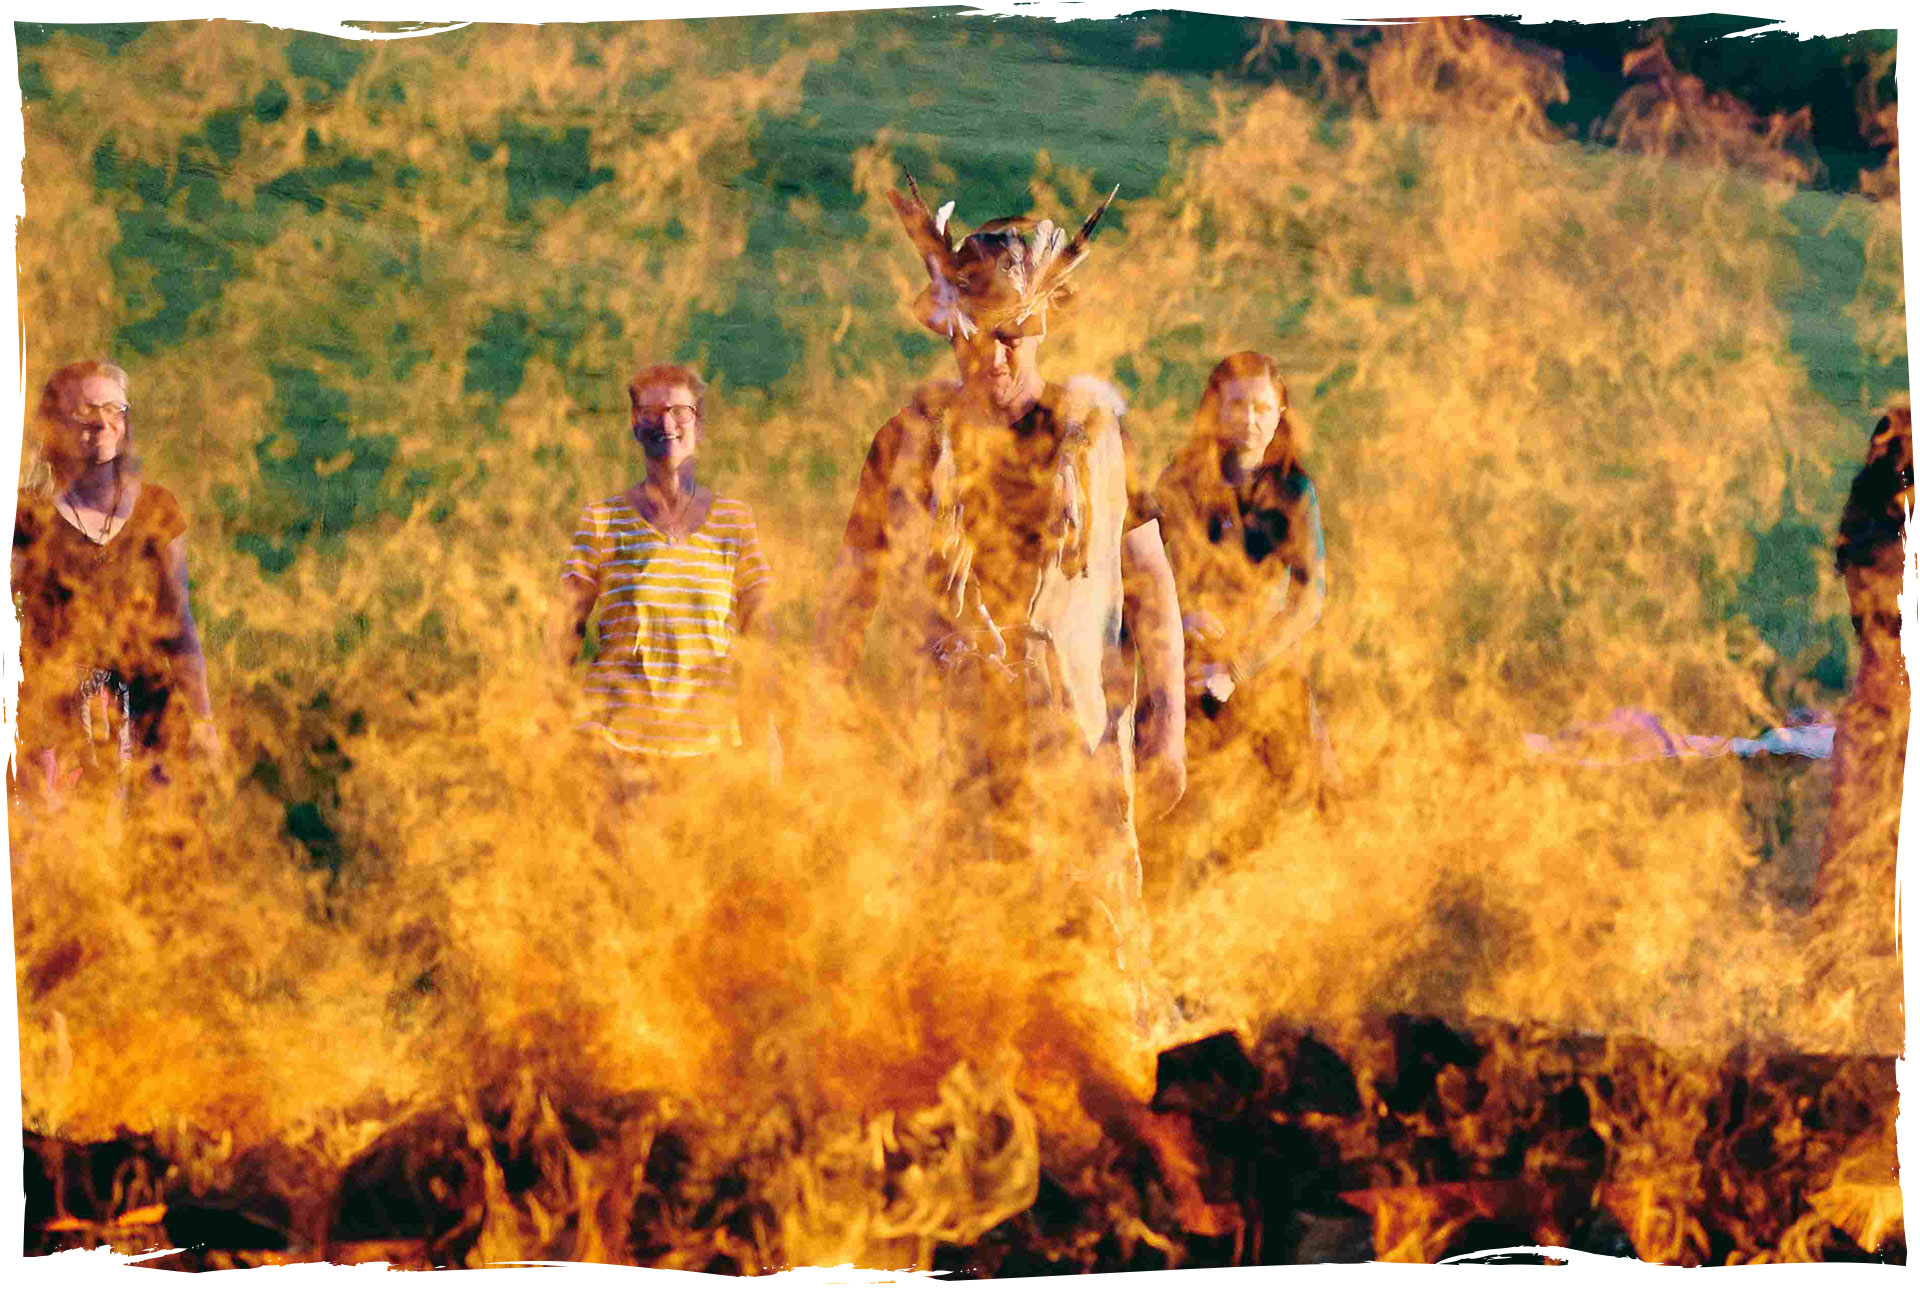 Wall of fire on a meadow - shamanistic ritual